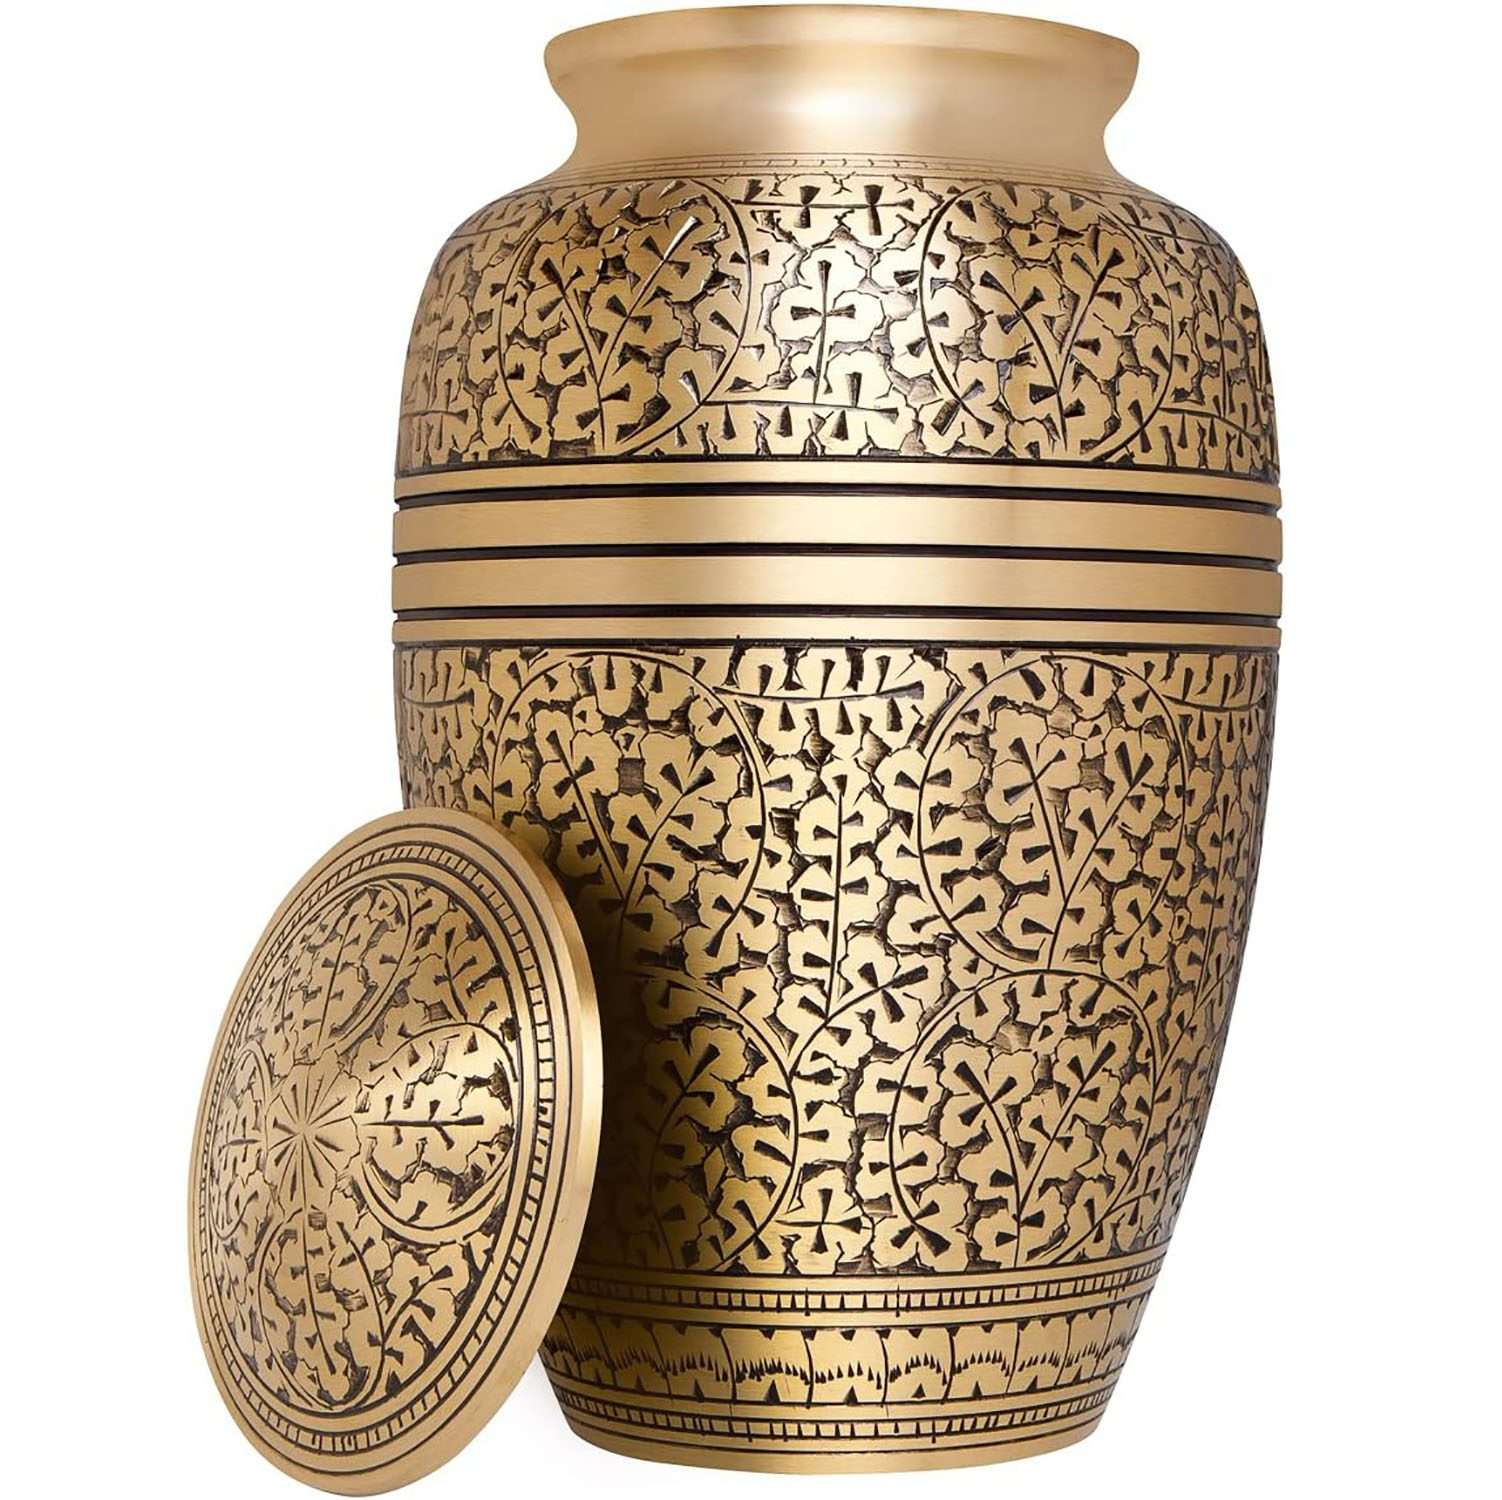 Golden Cremation Urn for Human ashes | Handcrafted Brass Urn